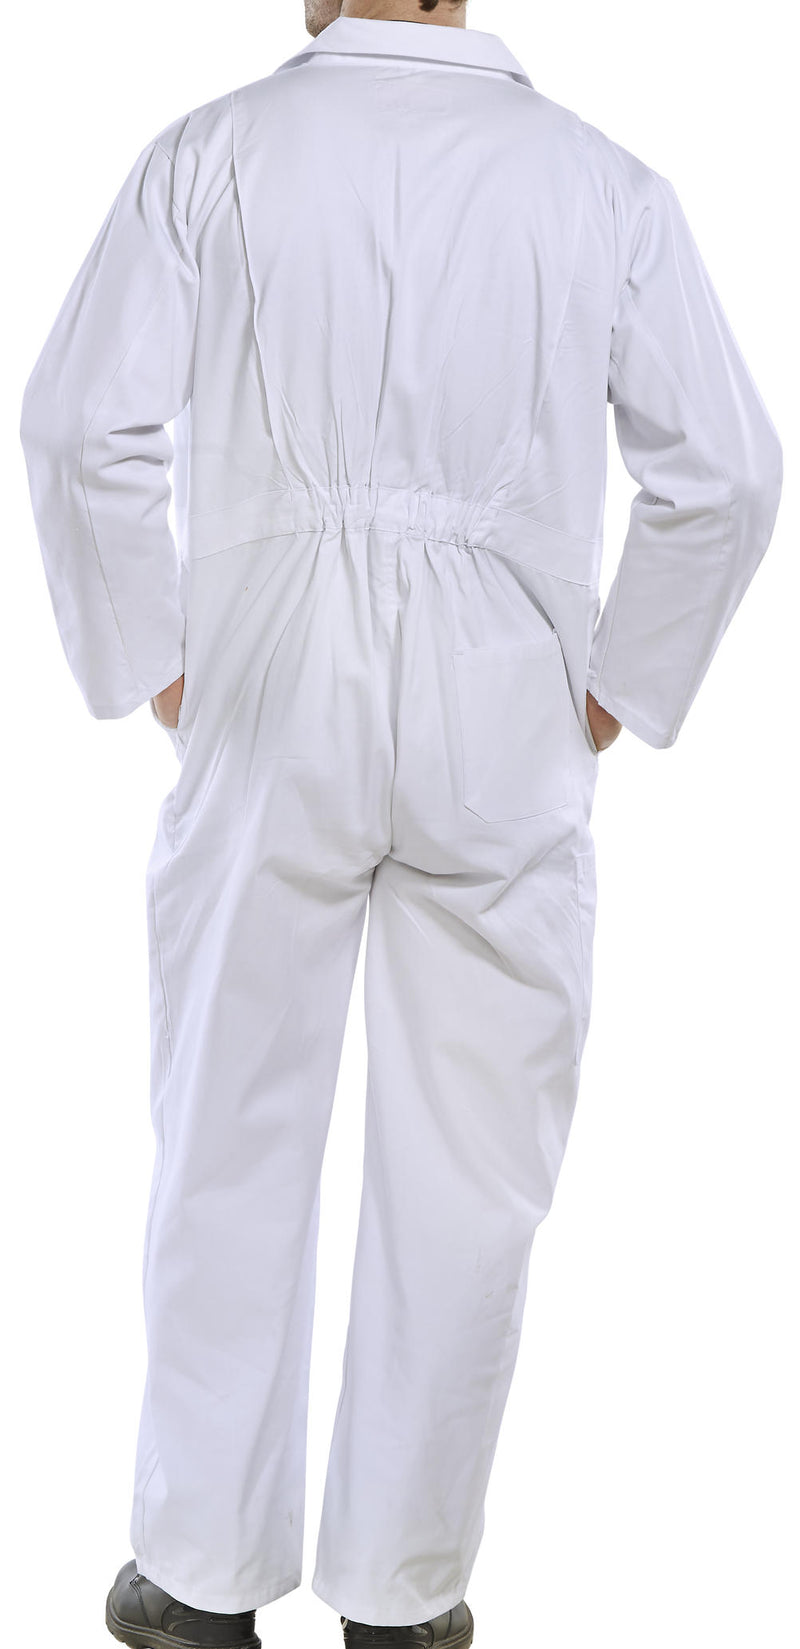 White Pre-Shrunk Boiler Suit  {All Sizes} - UK BUSINESS SUPPLIES